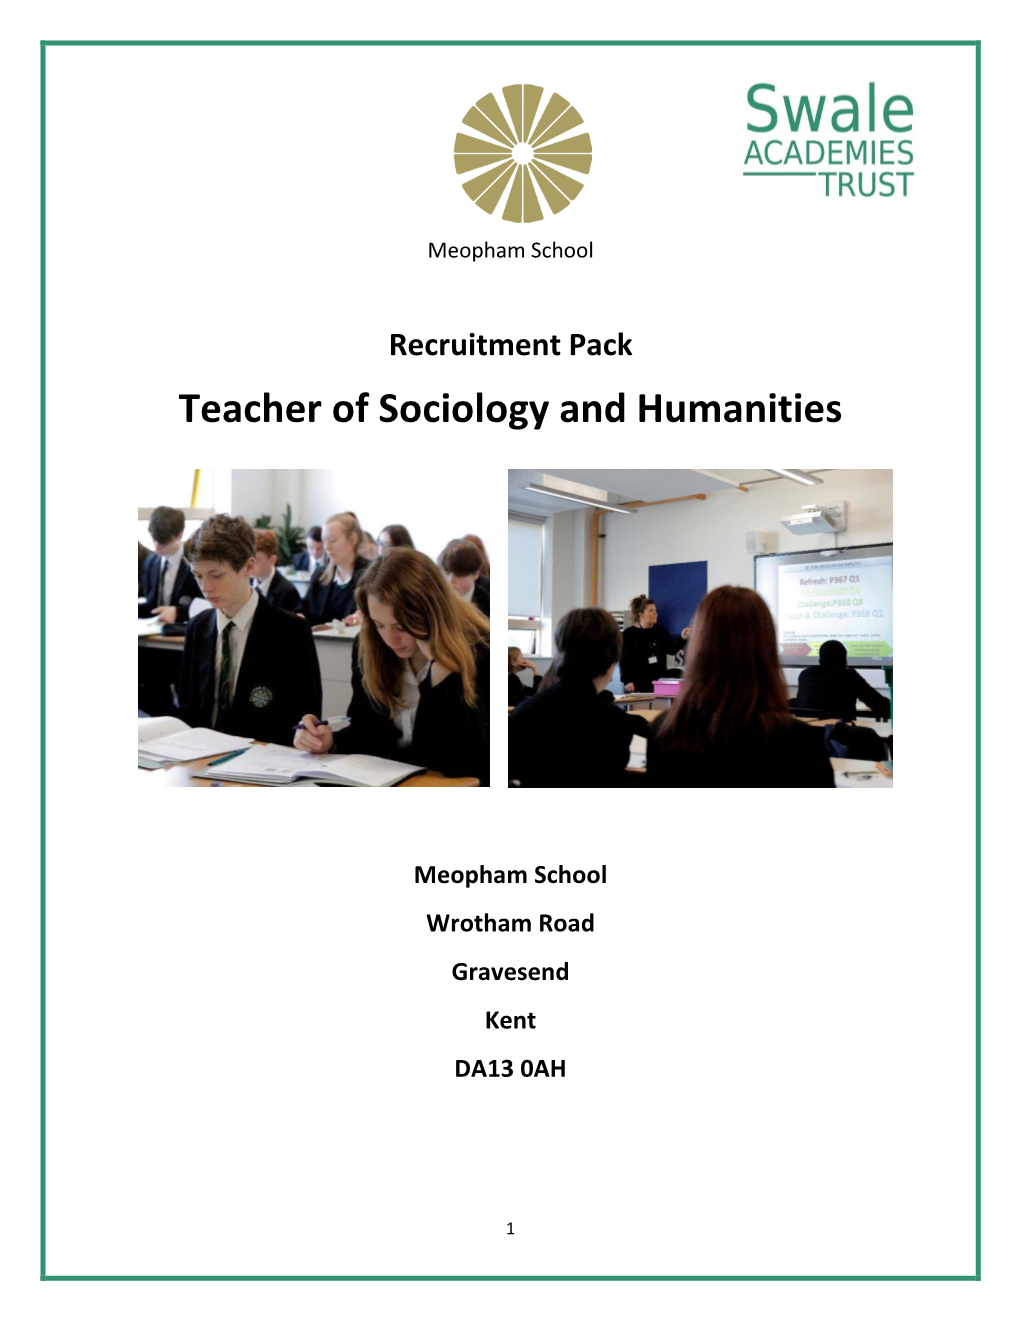 Teacher of Sociology and Humanities